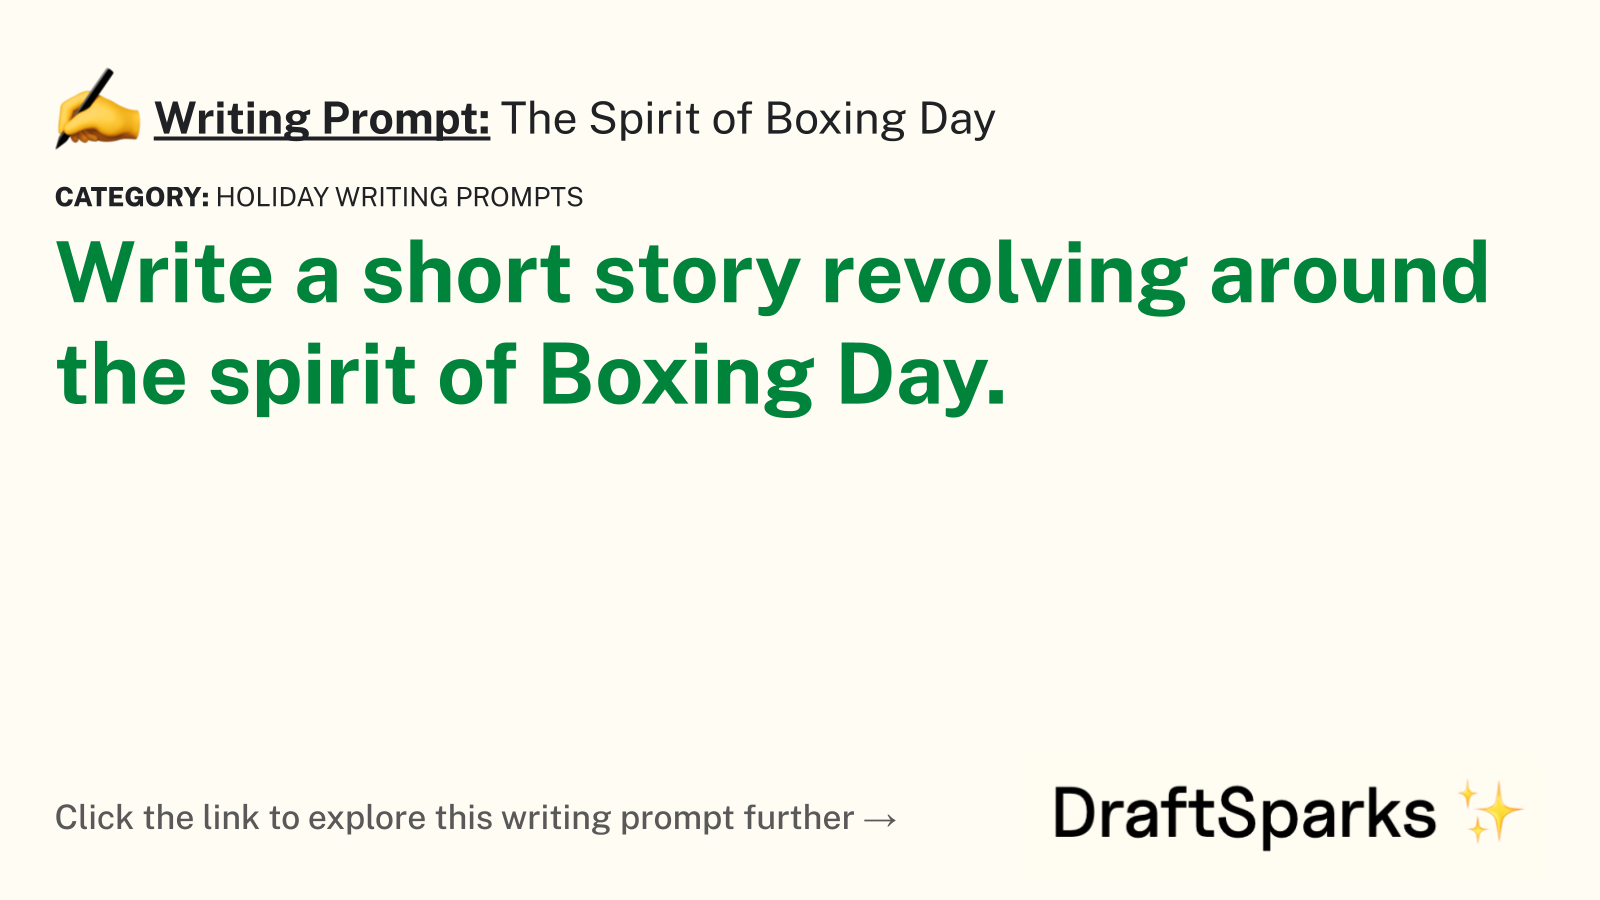 The Spirit of Boxing Day